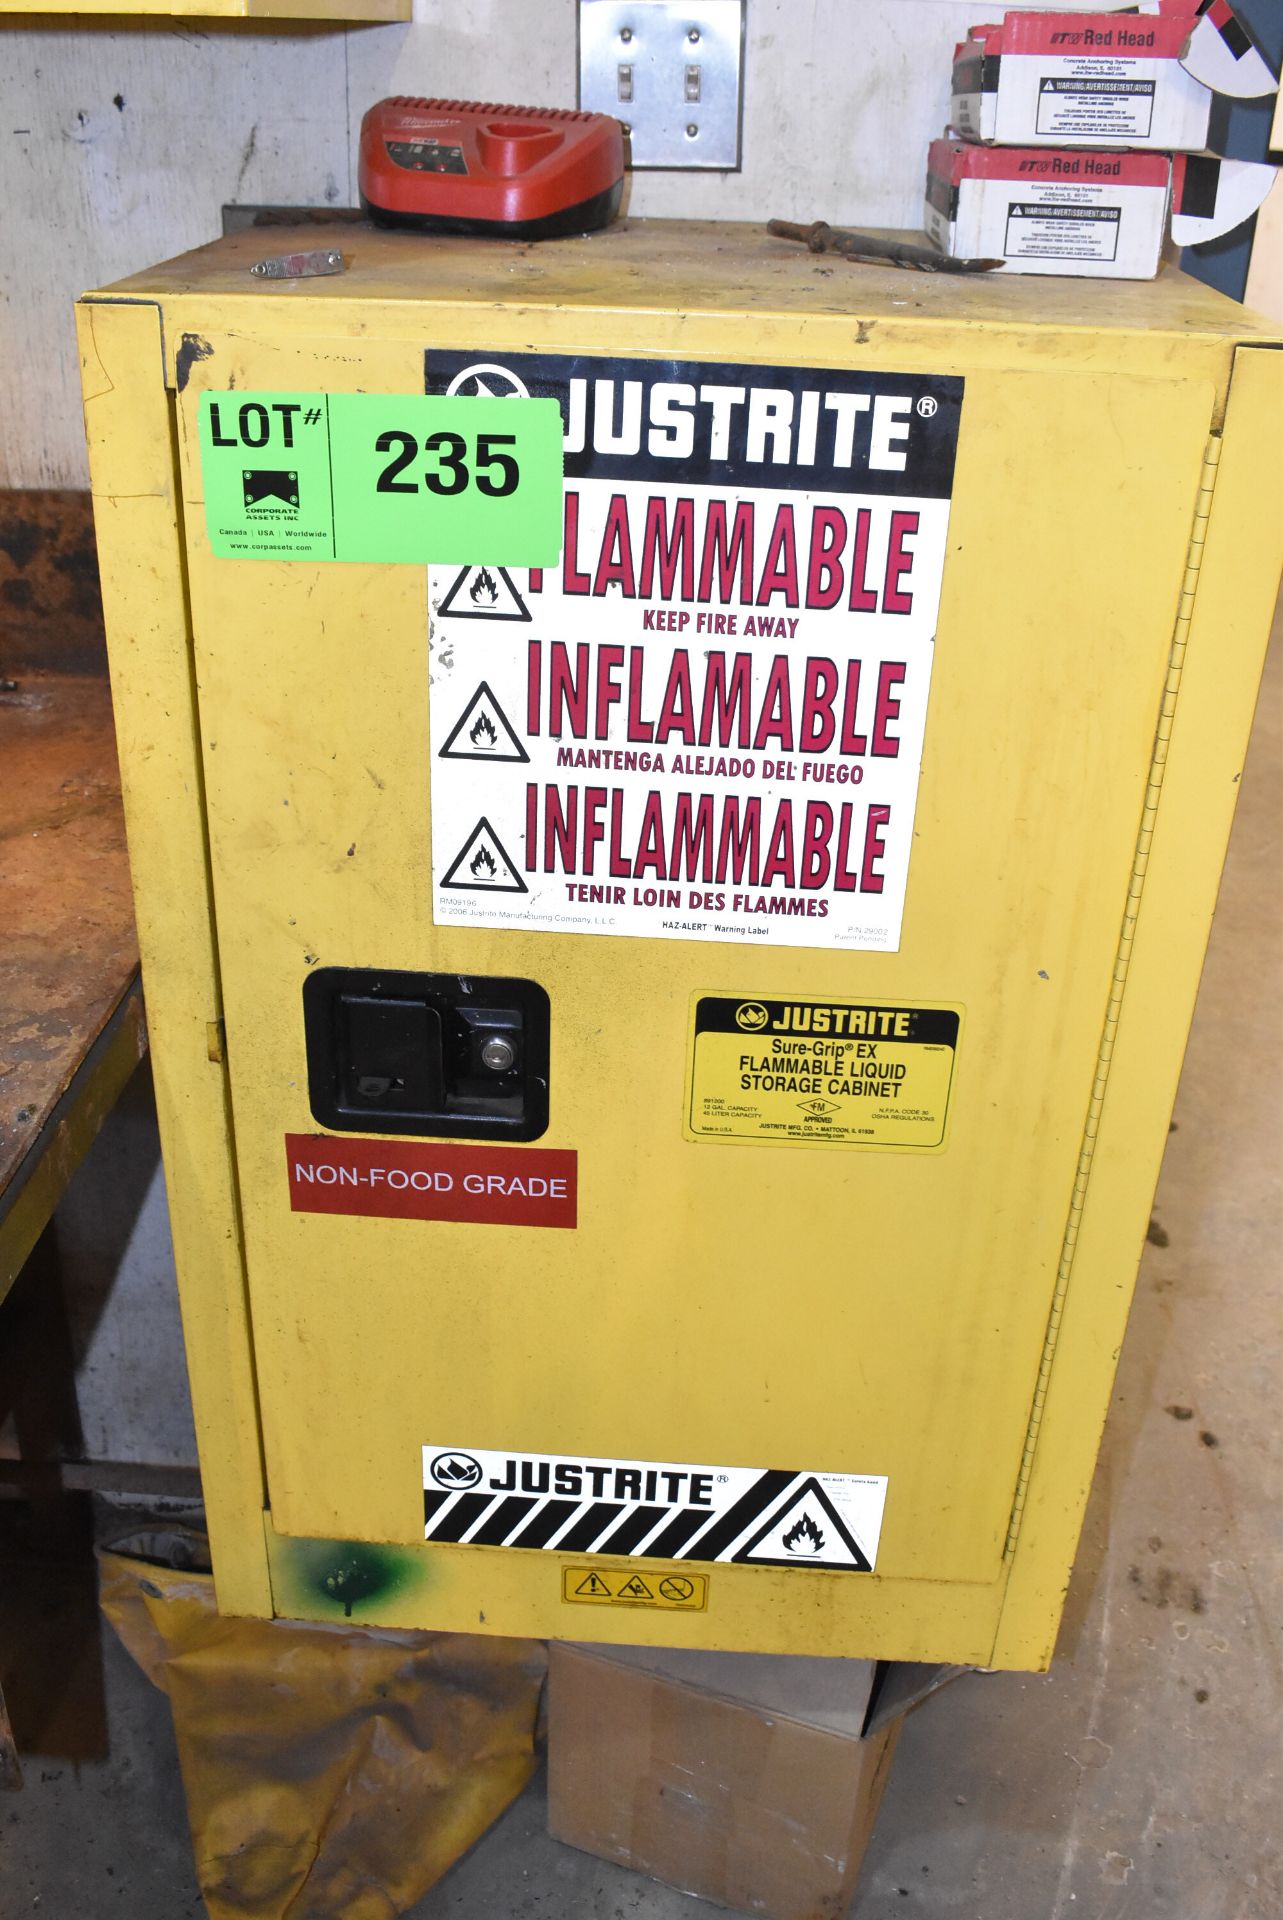 JUSTRITE FLAMMABLE STORAGE CABINET WITH CONTENTS [RIGGING FEE FOR LOT #235 - $50 CAD PLUS APPLICABLE